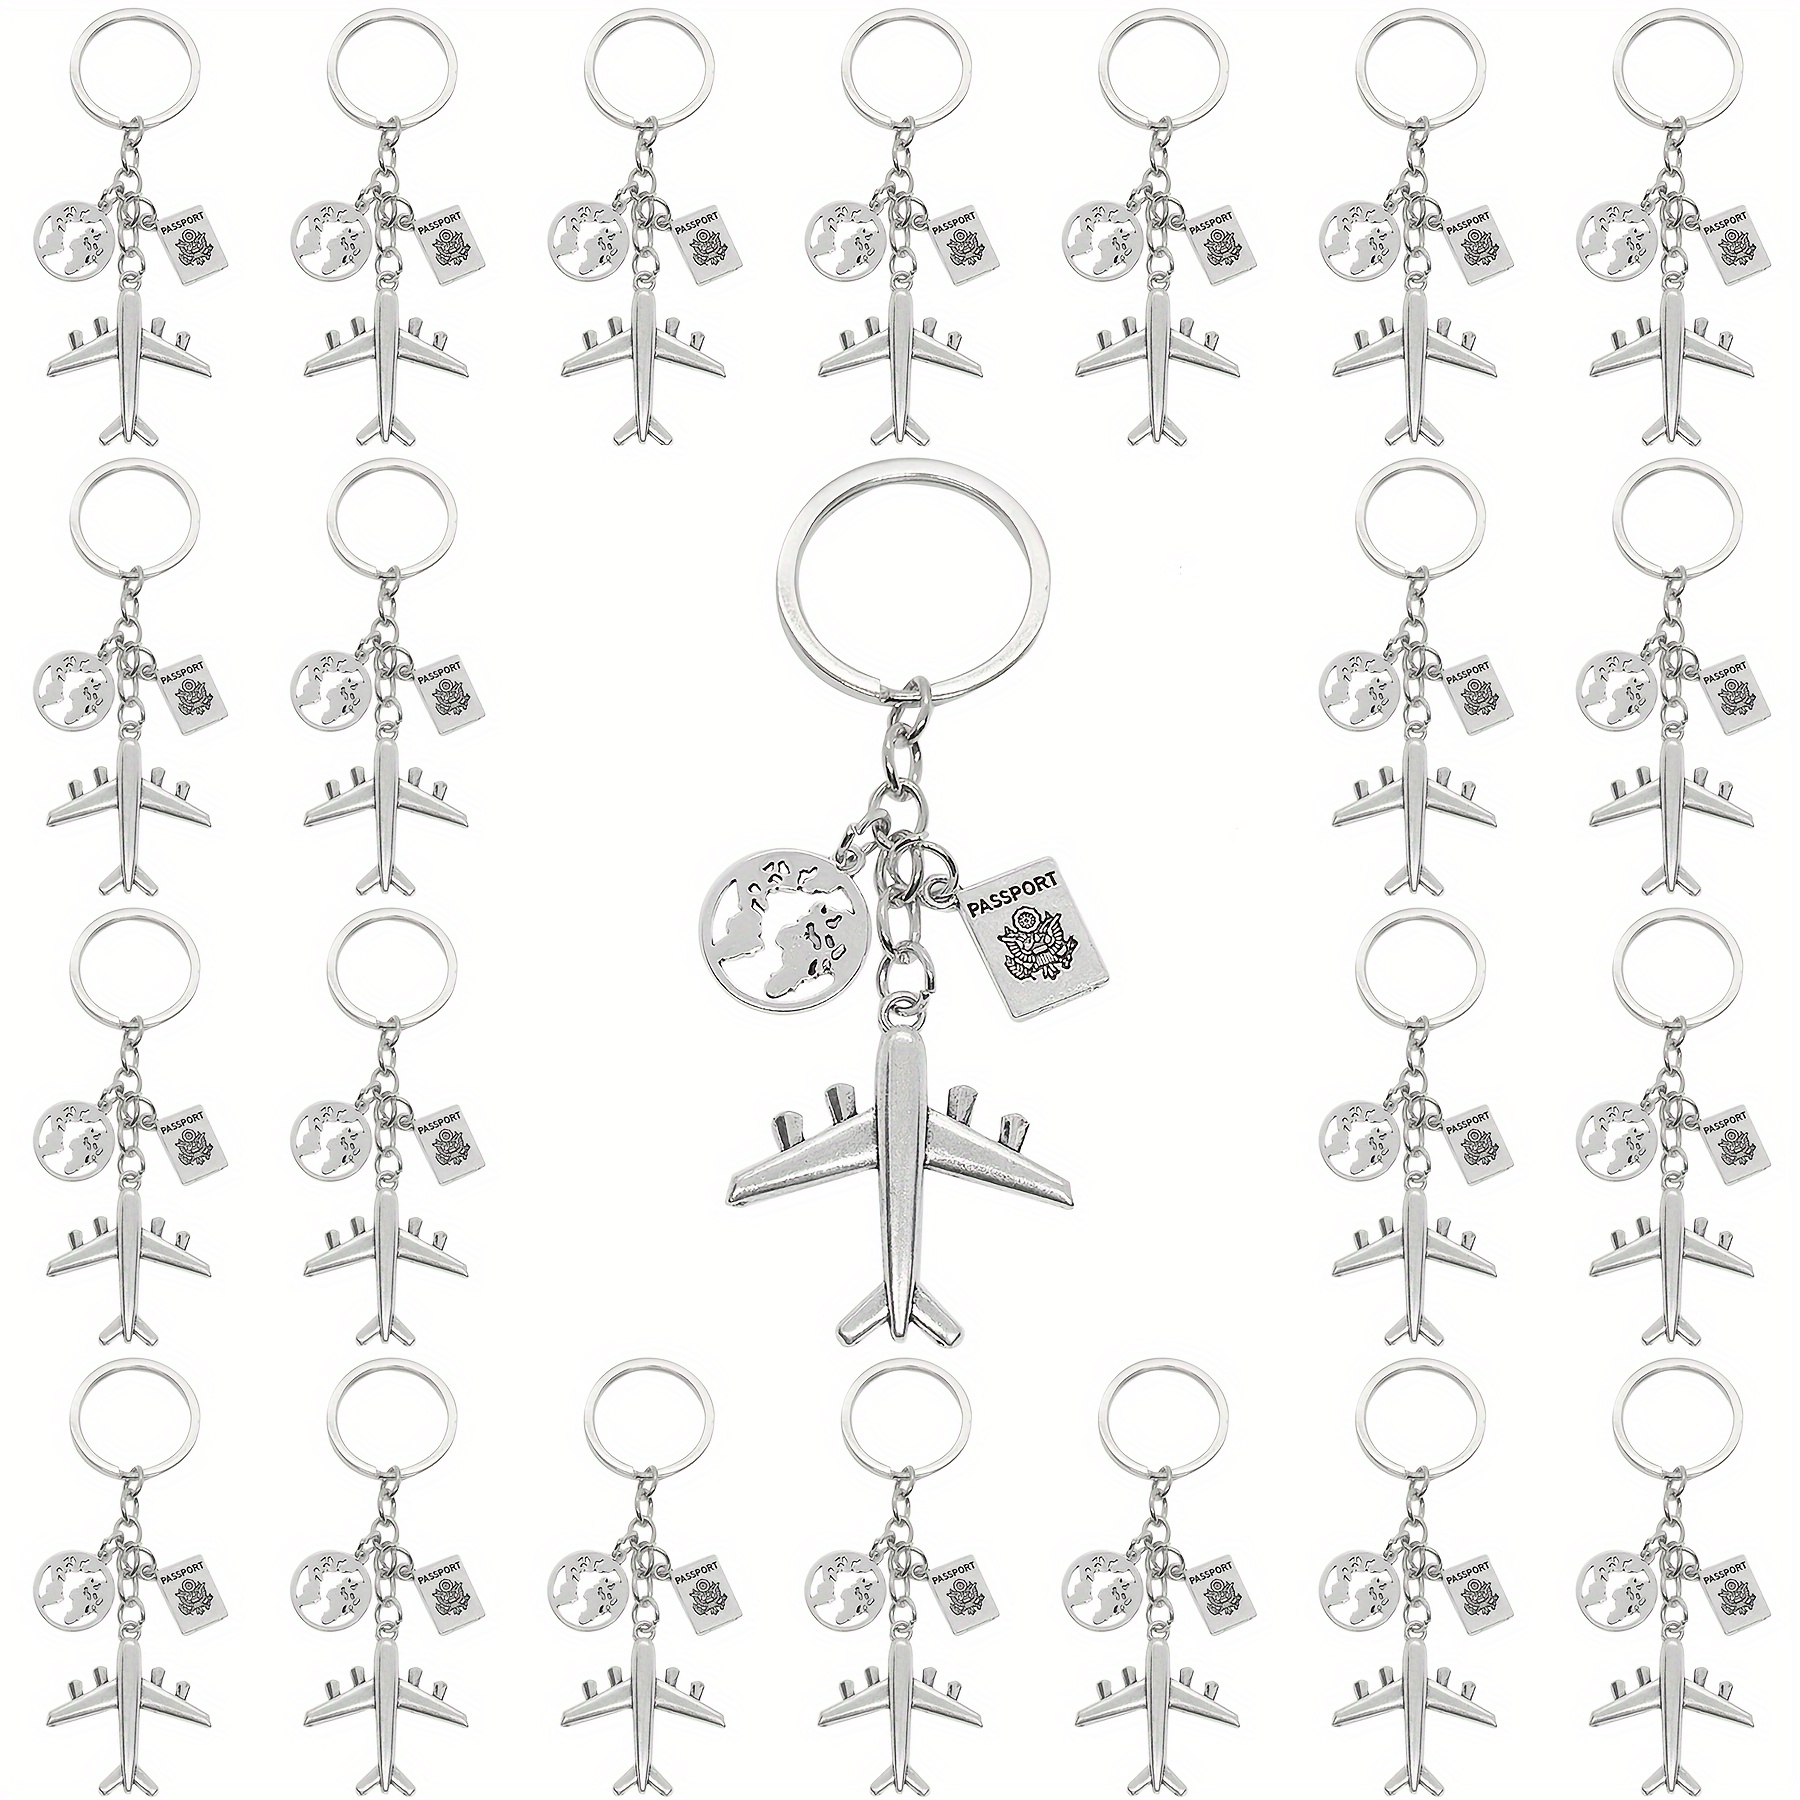 

20pcs Airplane Keychain Pilot Travel Keyring Key Chains Earth Airplane Pendant Diy Gift Friendship Jewelry For Traveler